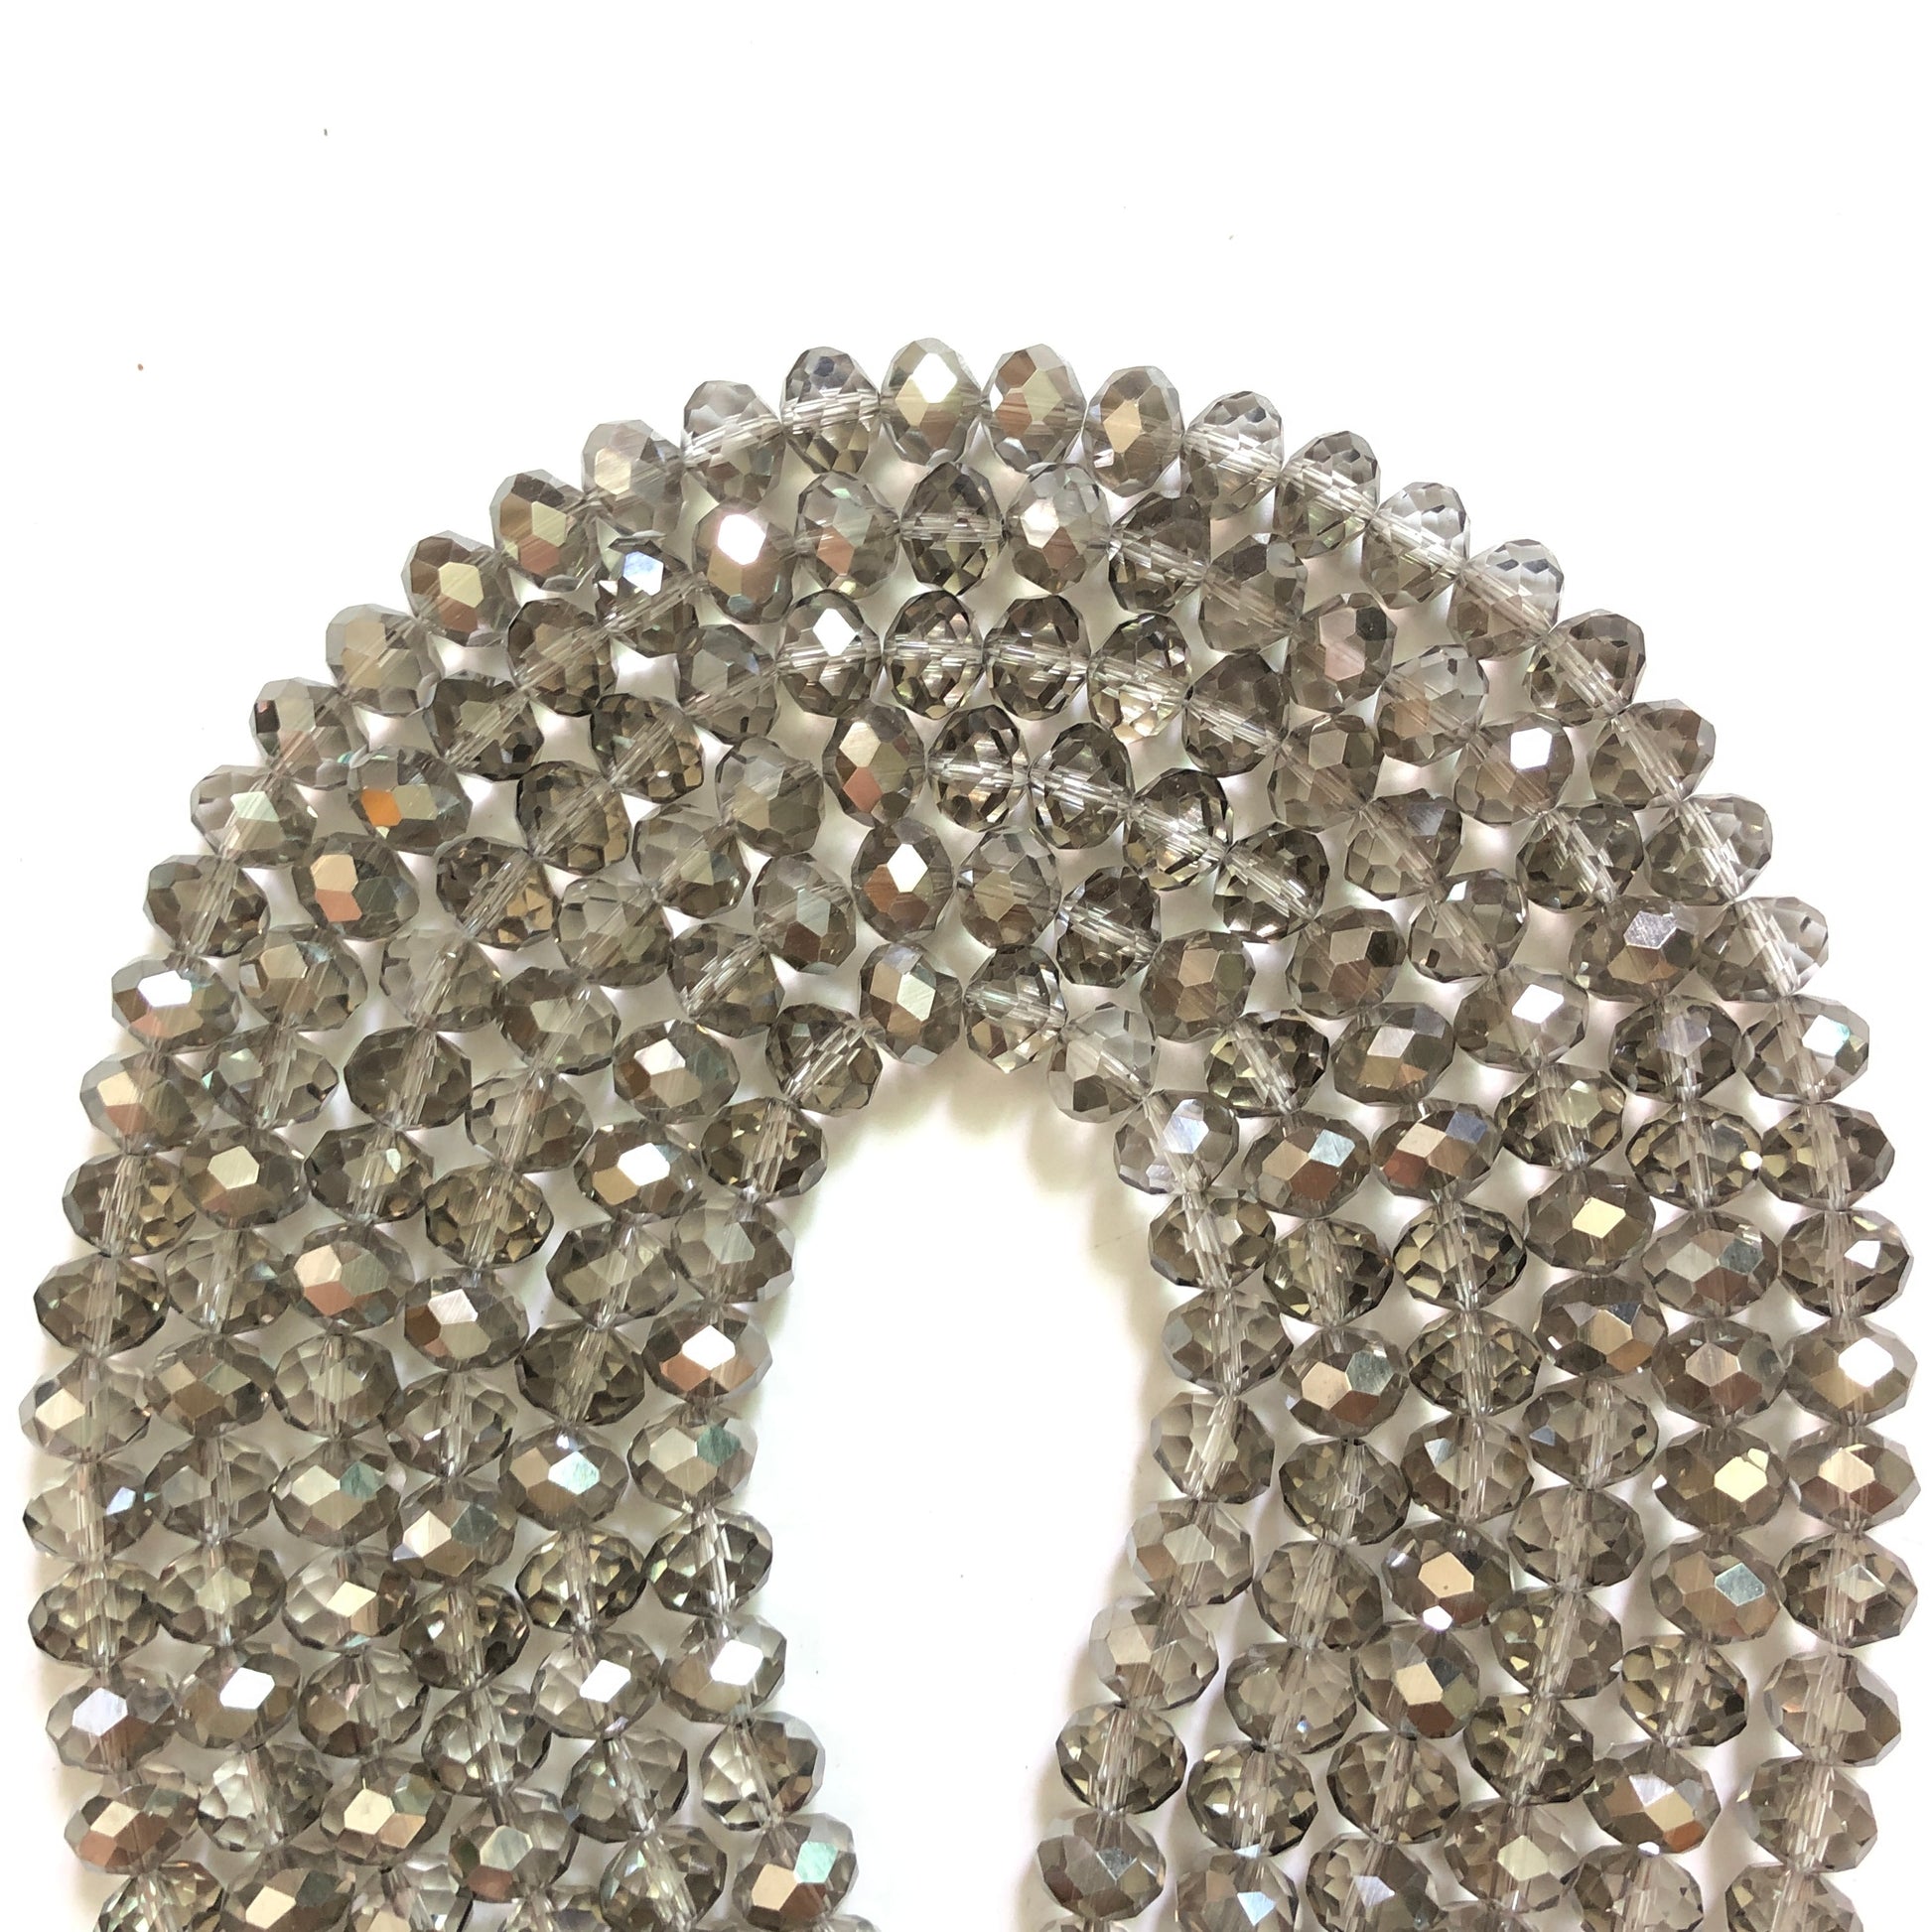 2 Strands/lot 10mm Clear Gray Faceted Glass Beads Glass Beads Faceted Glass Beads Charms Beads Beyond